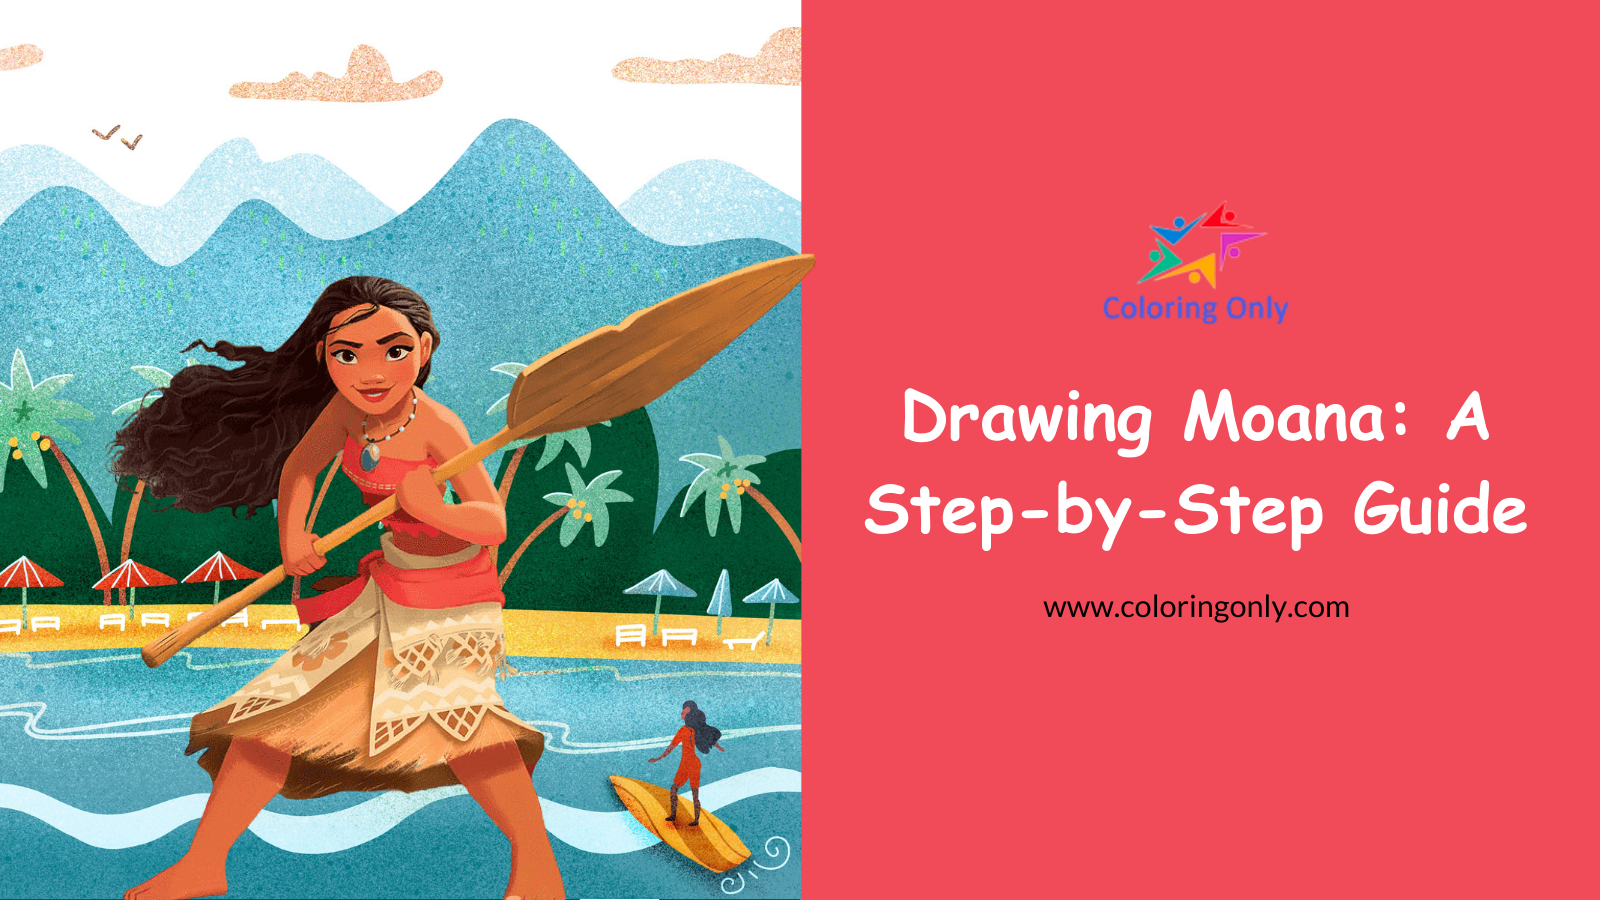 Drawing Moana: A Step-by-Step Guide